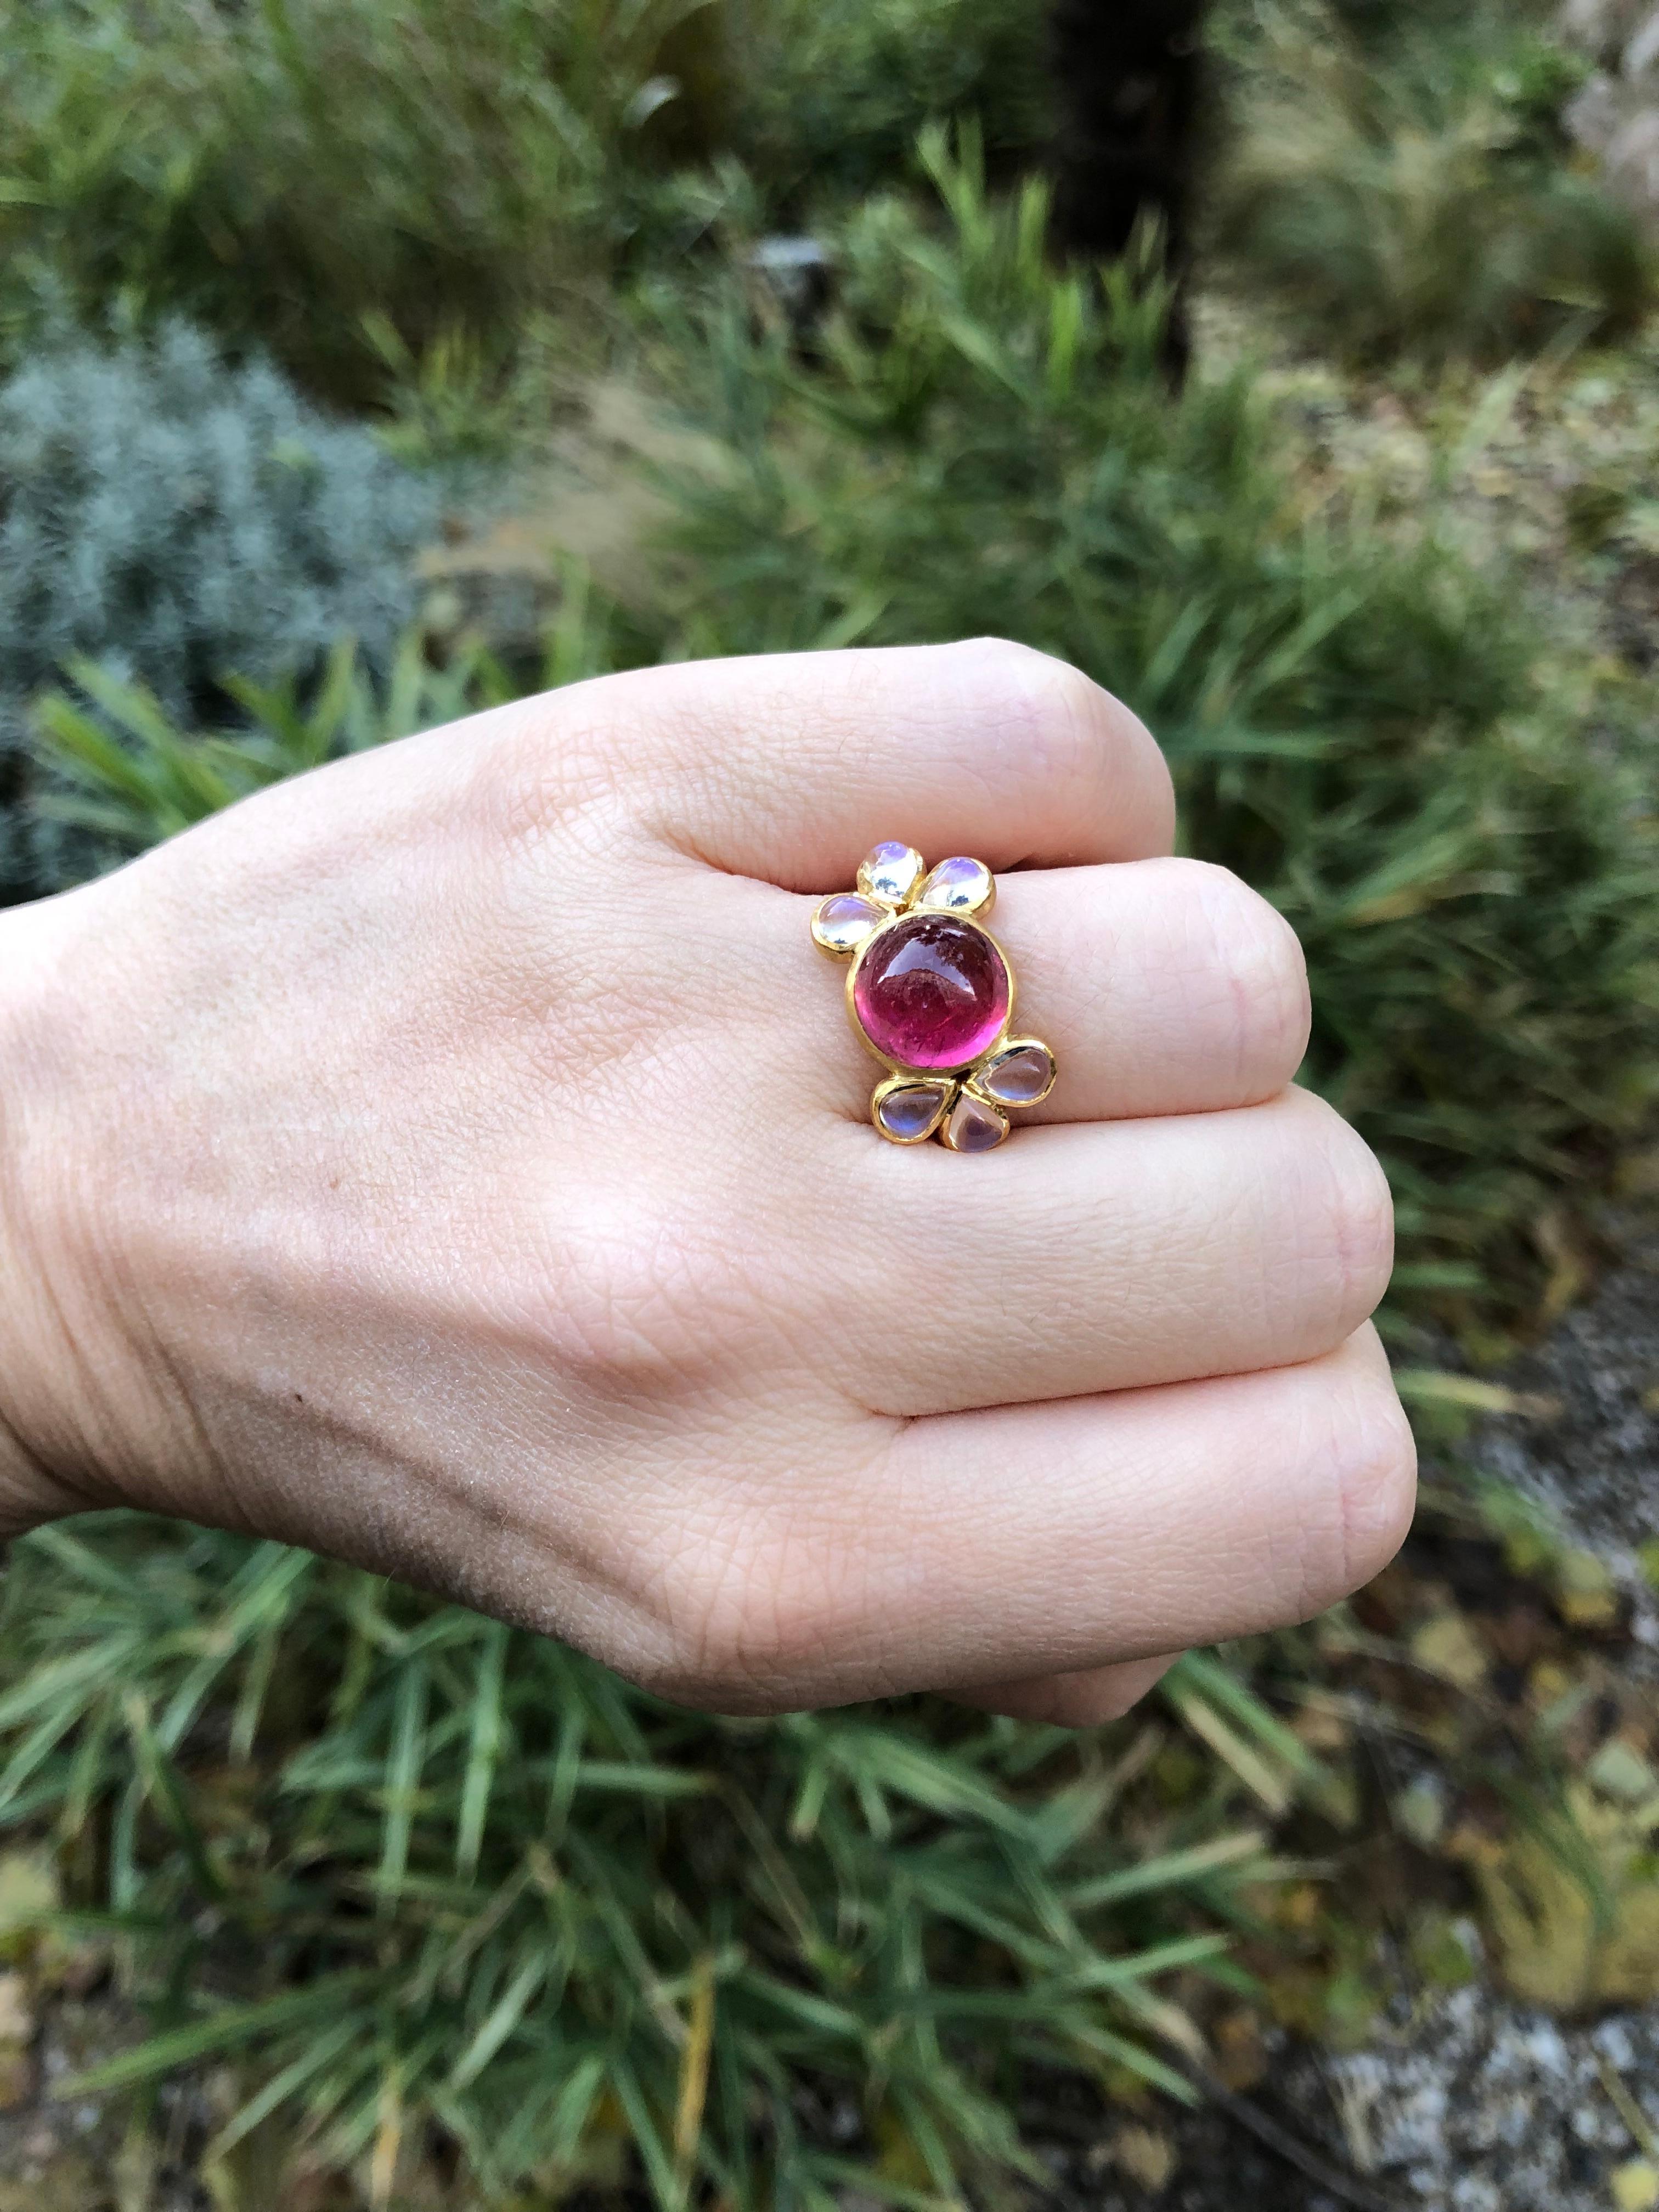 This delicate ring is composed of an intense Pink Tourmaline cabochon of 5.56 cts surrounded by 6 moonstones cabochons (total weight: 2.08cts). The pink tourmaline is natural with typical inclusions with a juicy pink colour (the photos taken outside